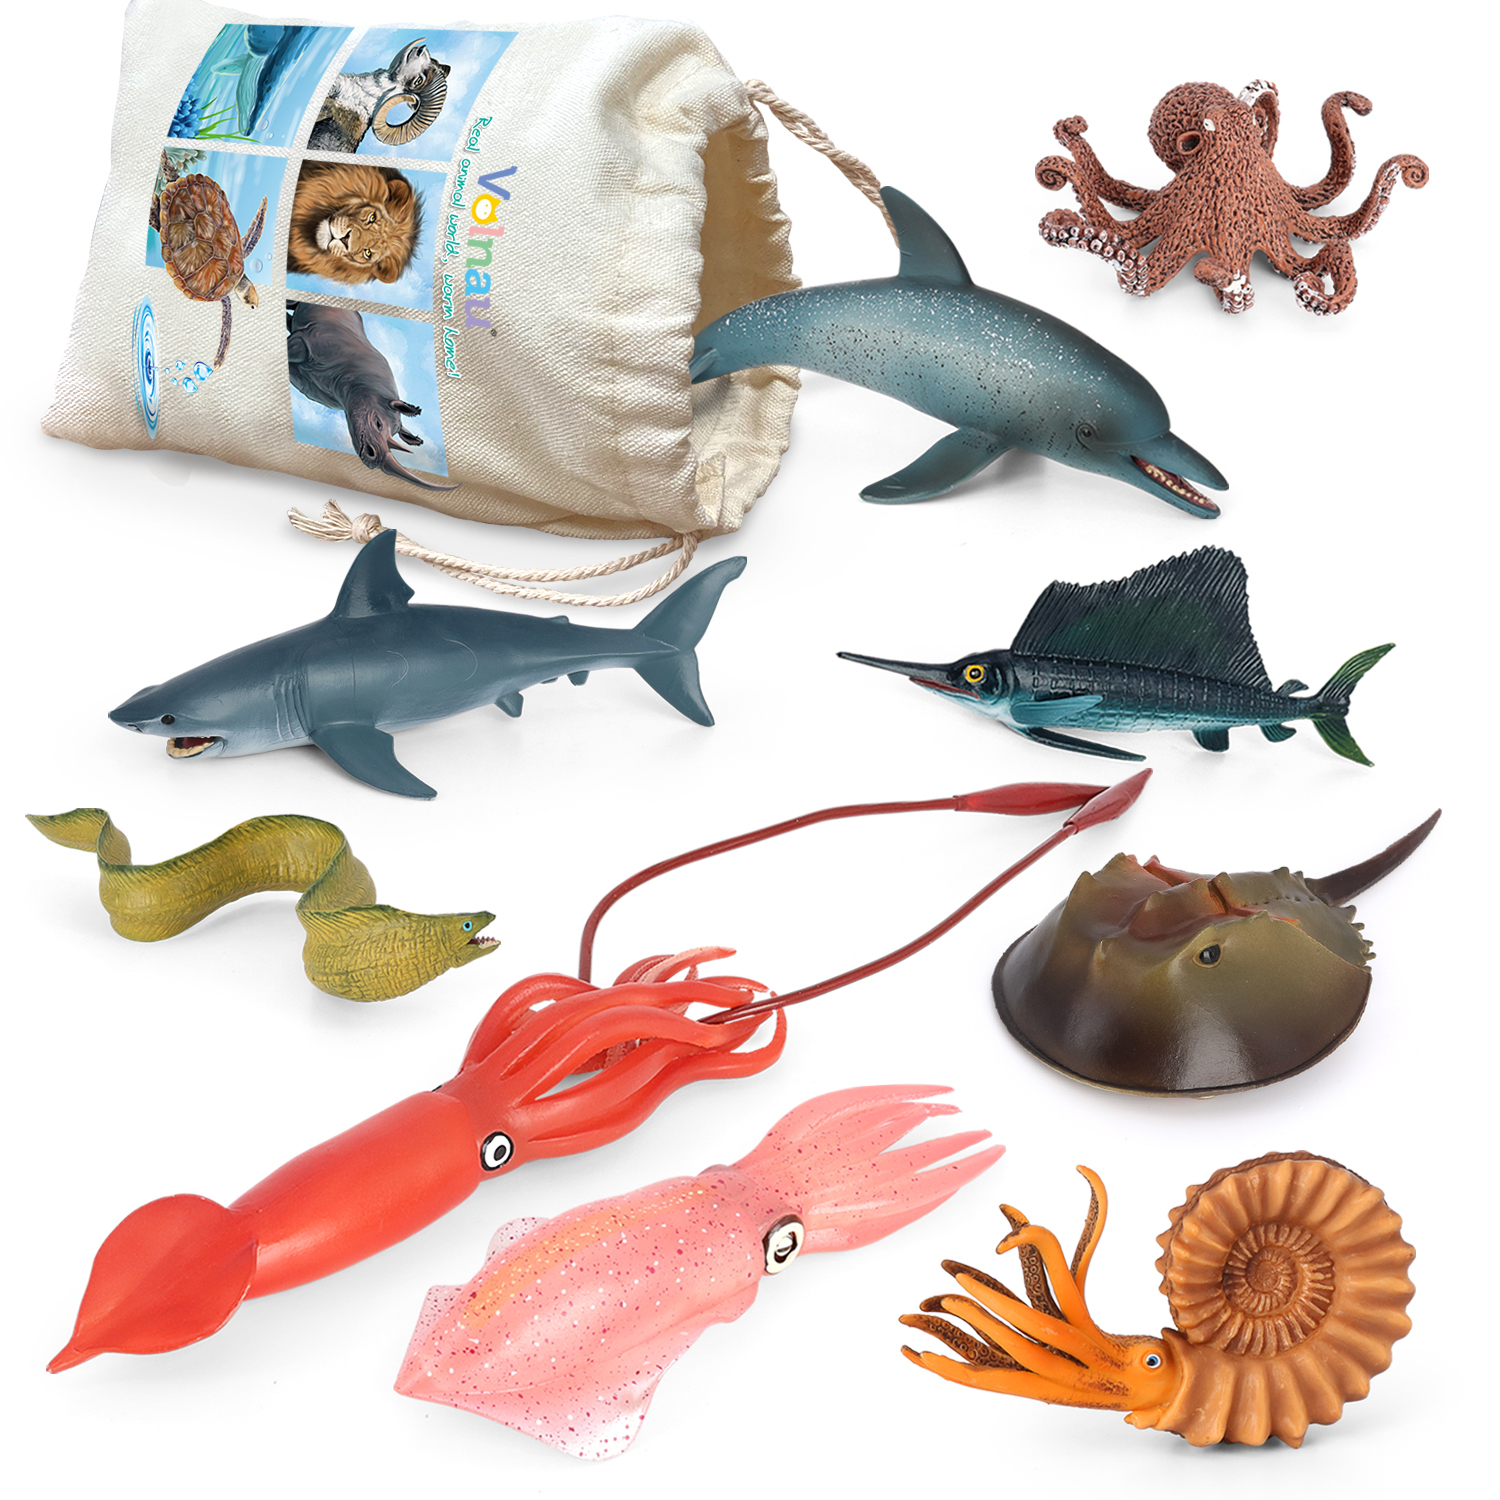 Volnau 9PCS Pacific Ocean Animal Figurines Sea Creature Toys Sea Shark Toys  for Toddlers Kids Christmas Birthday Gift Plastic Fish Toys Preschool Pack  and Bath Dolphin Sets